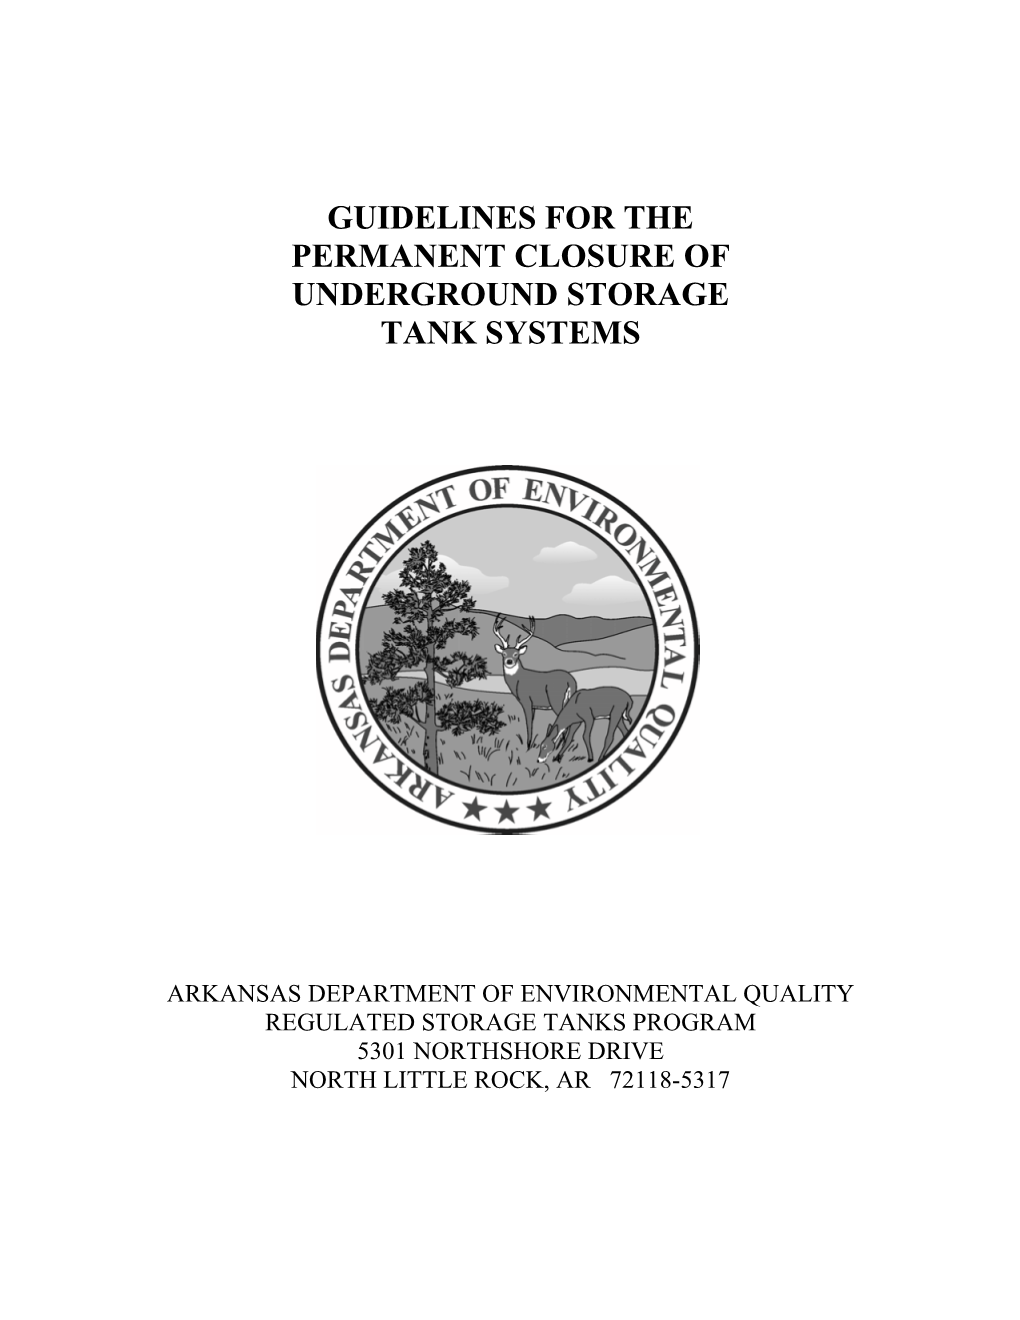 Guidelines for the Permanent Closure of Underground Storage Tank Systems